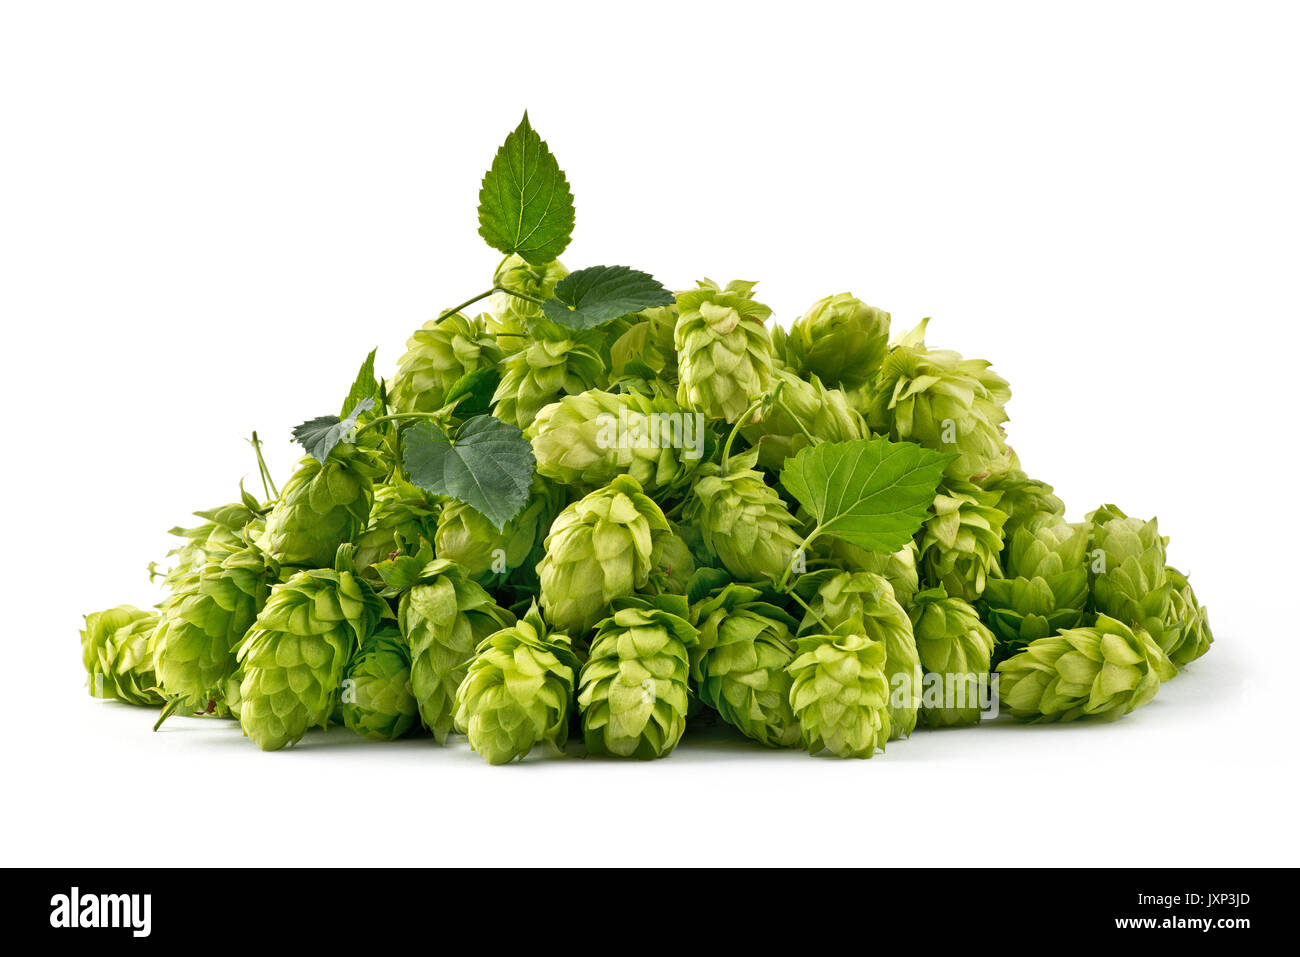 Hop Cones Isolated on the White Background. Stock Photo